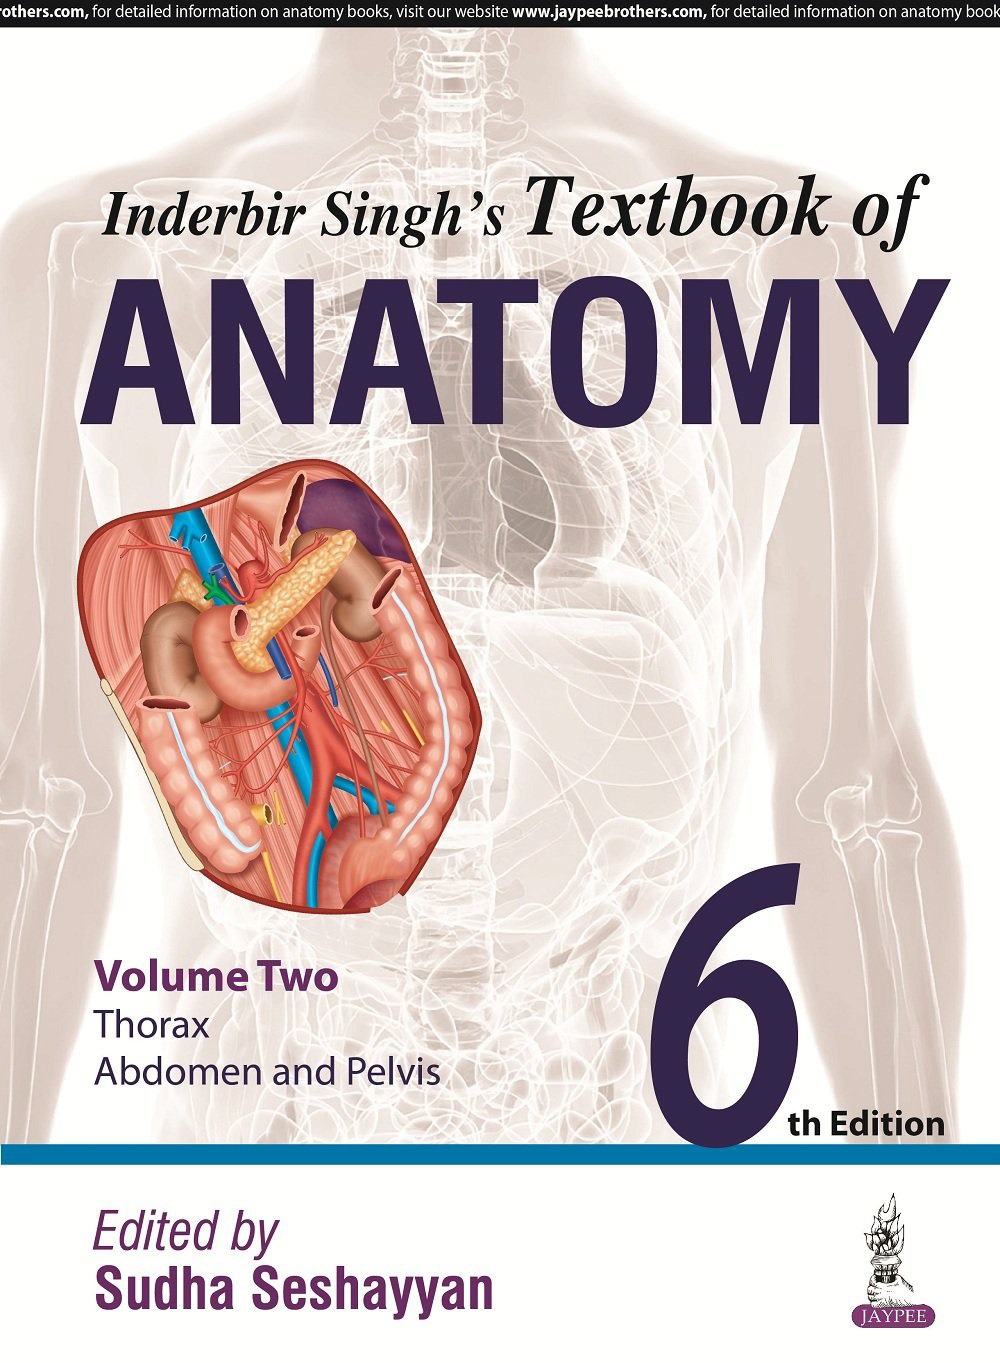 Inderbir sing text book of Anatomy volume two sixth edition pdf book free download